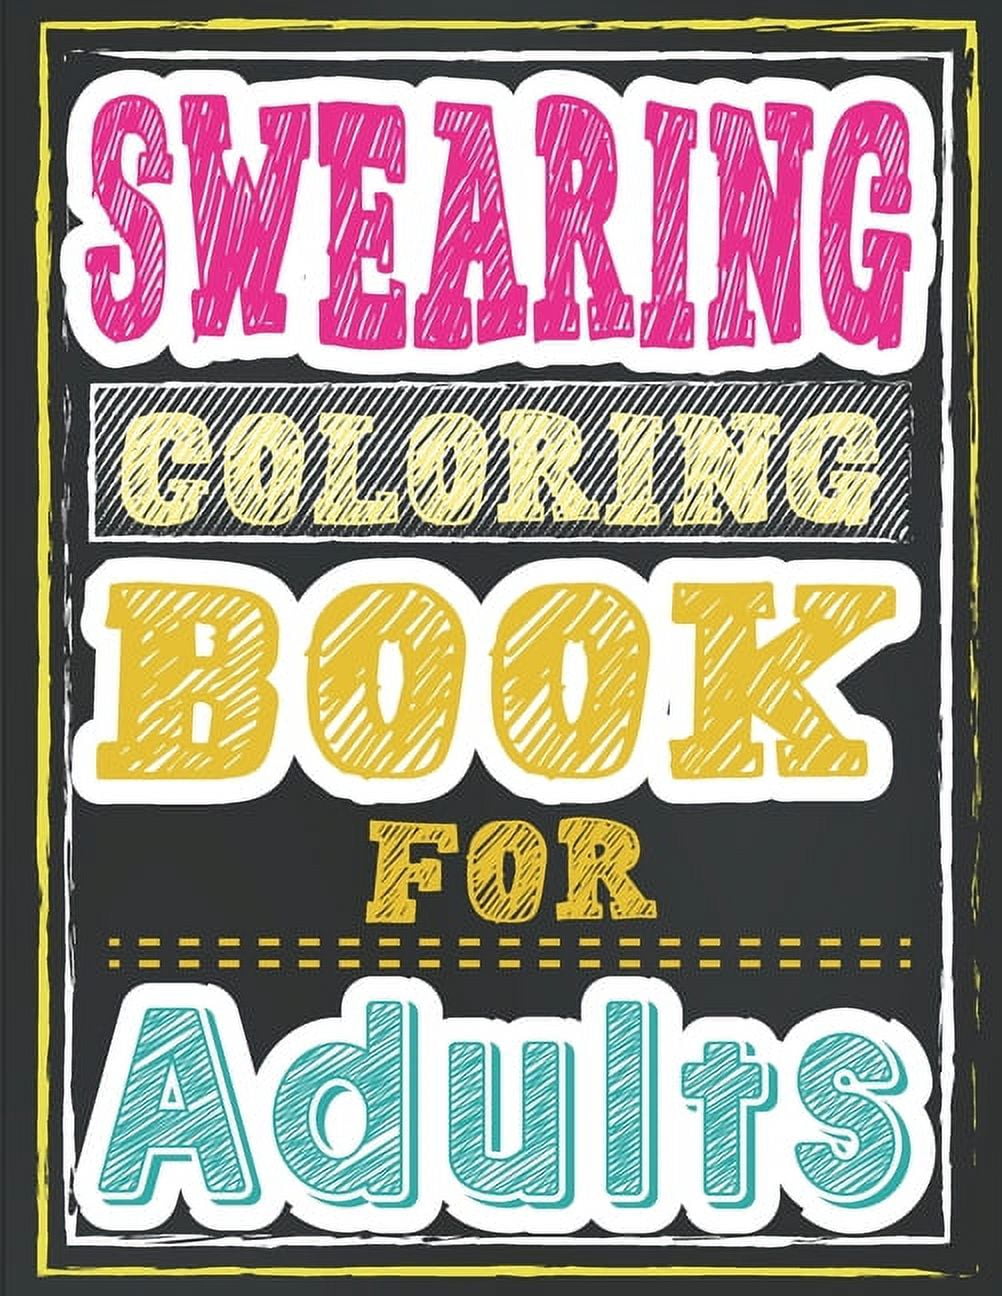 Swear Words Adult Coloring Book: Stress Relieving Fancy Swears Patterns  (Paperback) 